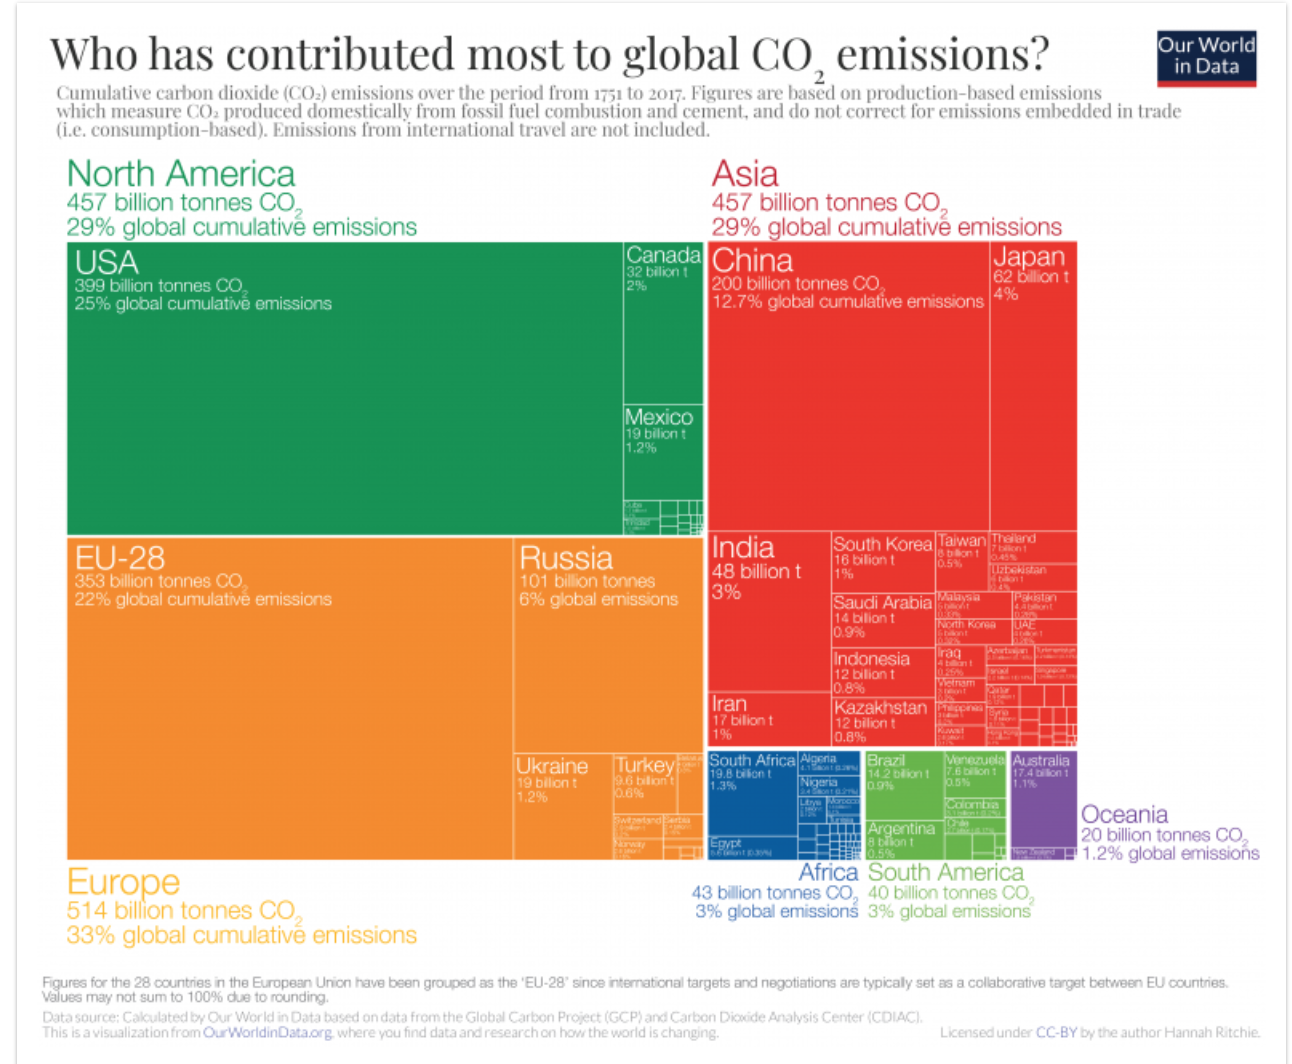 Emissions World in data